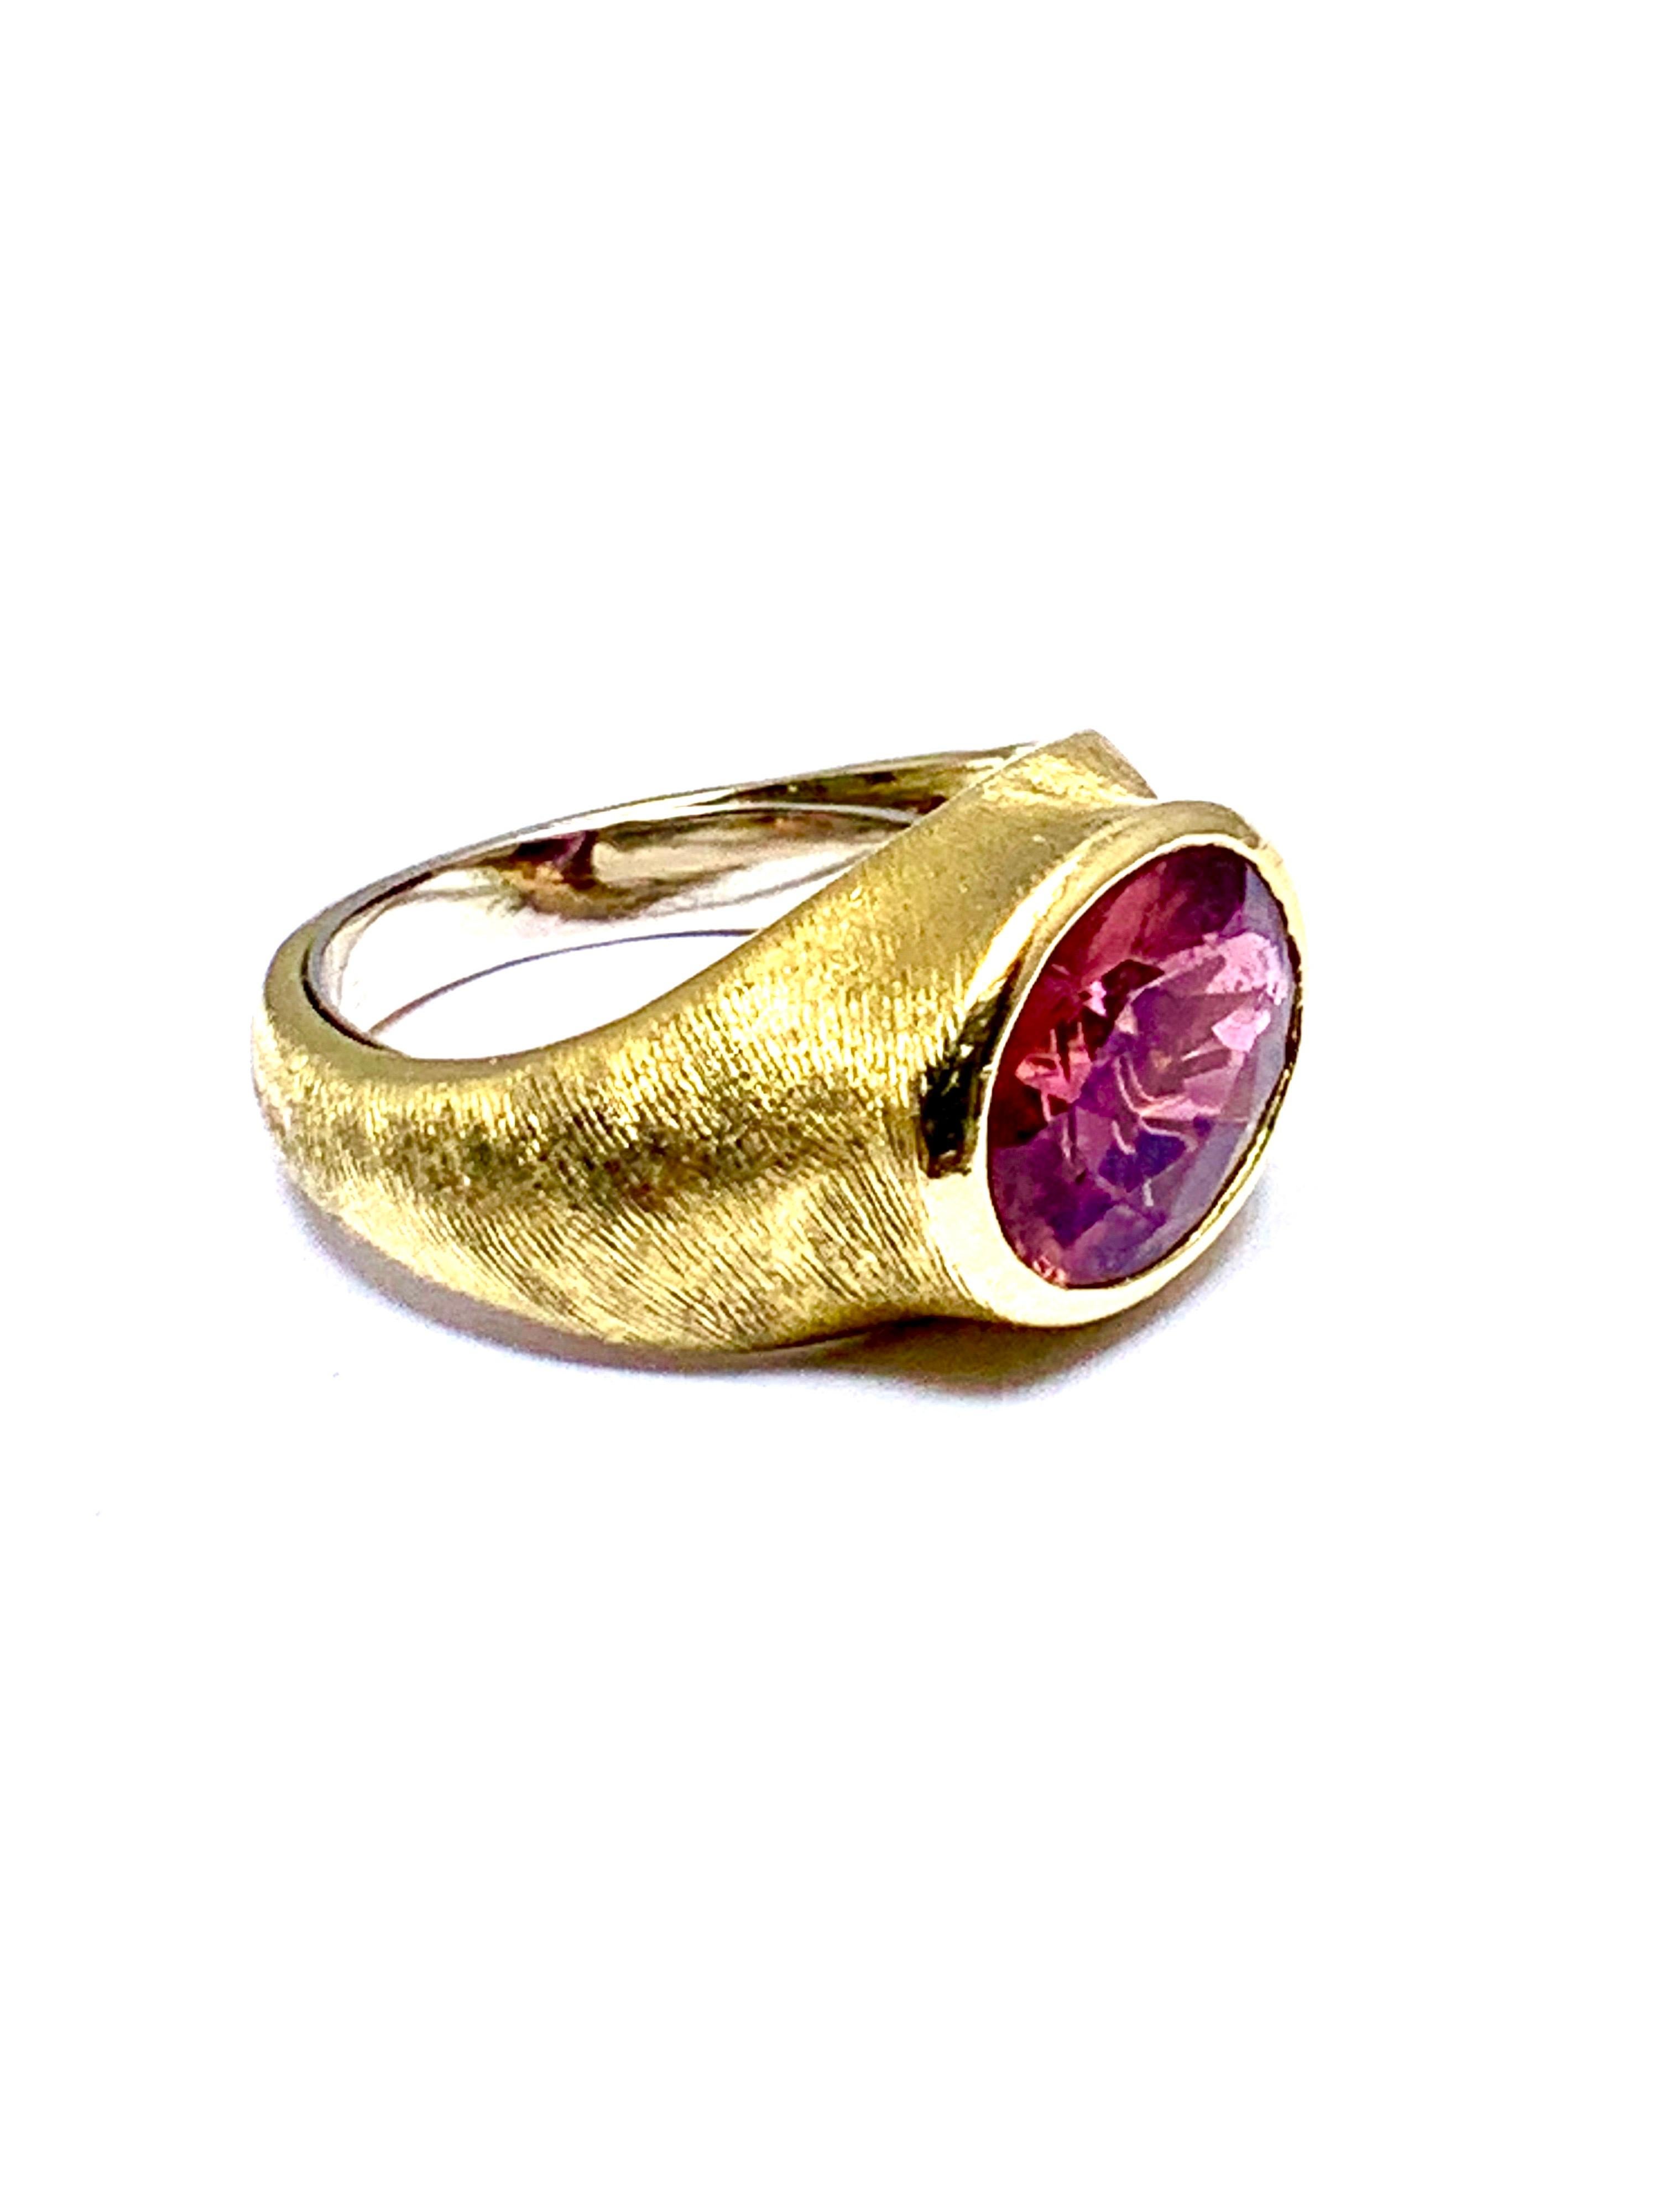 Oval Cut Burle Marx 3.57 Carat Faceted Oval Pink Tourmaline and 18 Karat Yellow Gold Ring